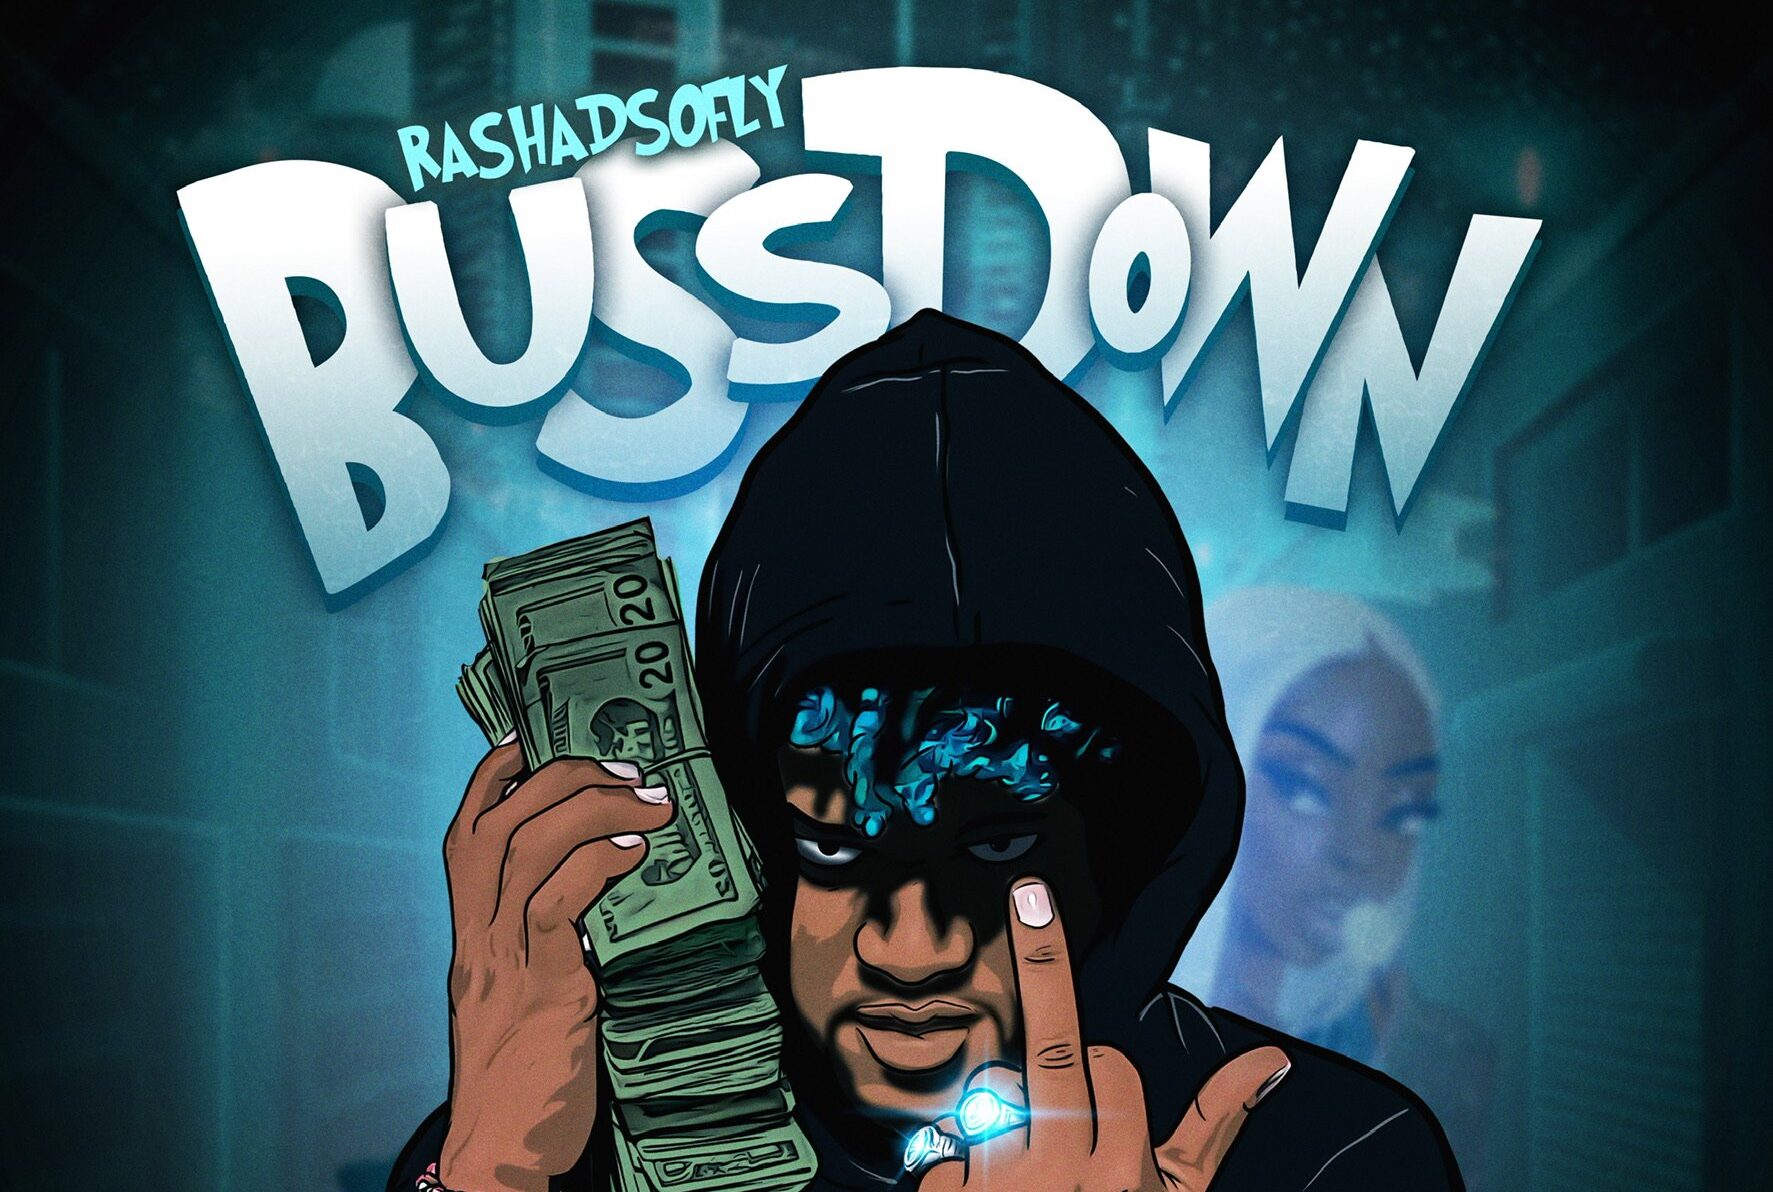 RashadSoFly Set to Release New Highly Anticipated Single "Buss Down"